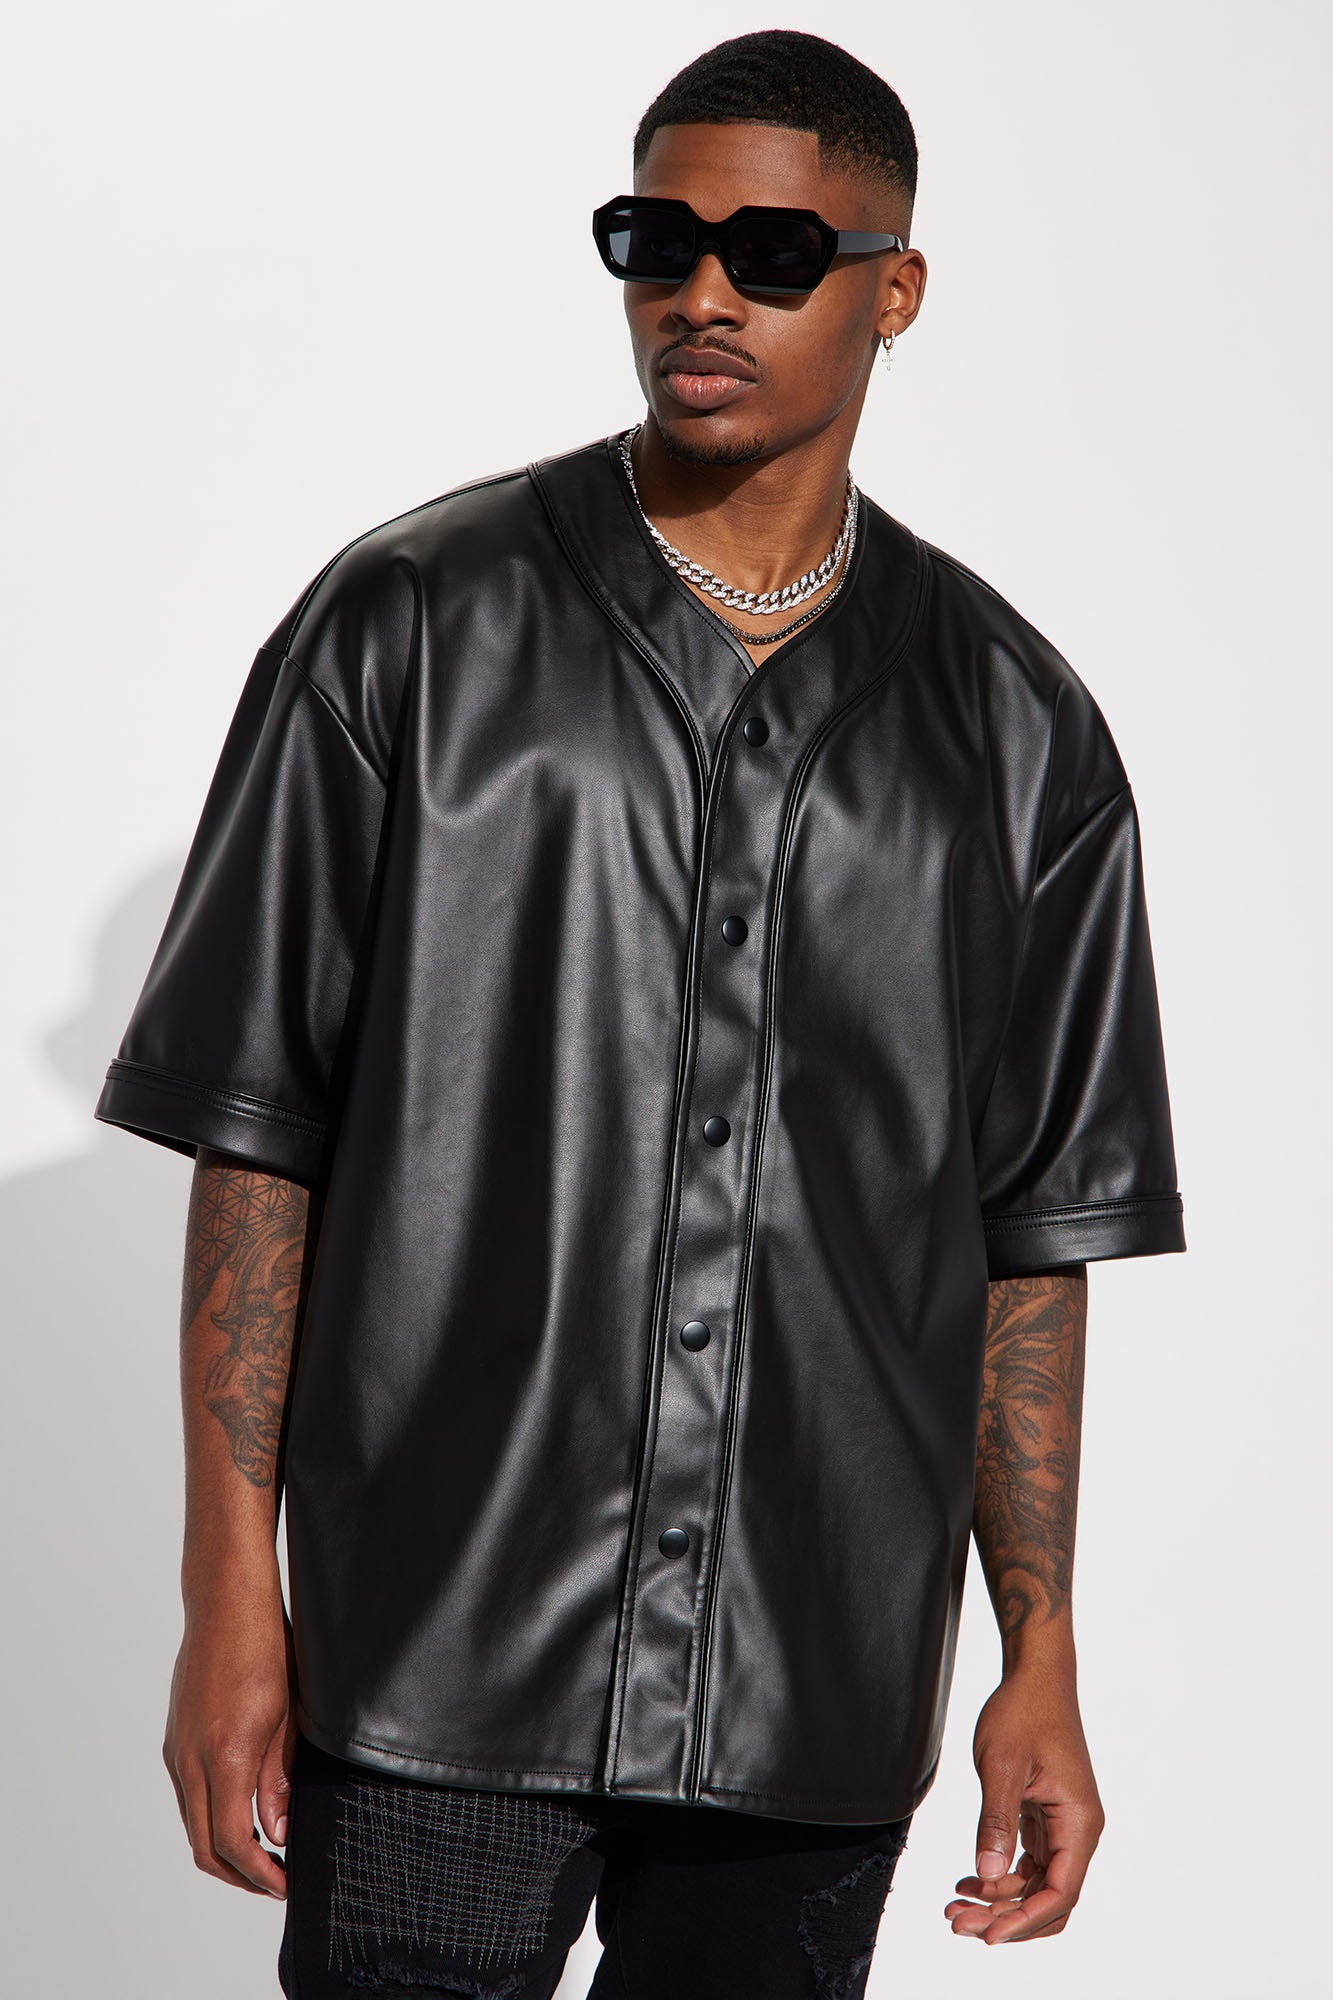 Men's Utility Faux Leather Short Sleeve Button Up Shirt in Black Size Small by Fashion Nova